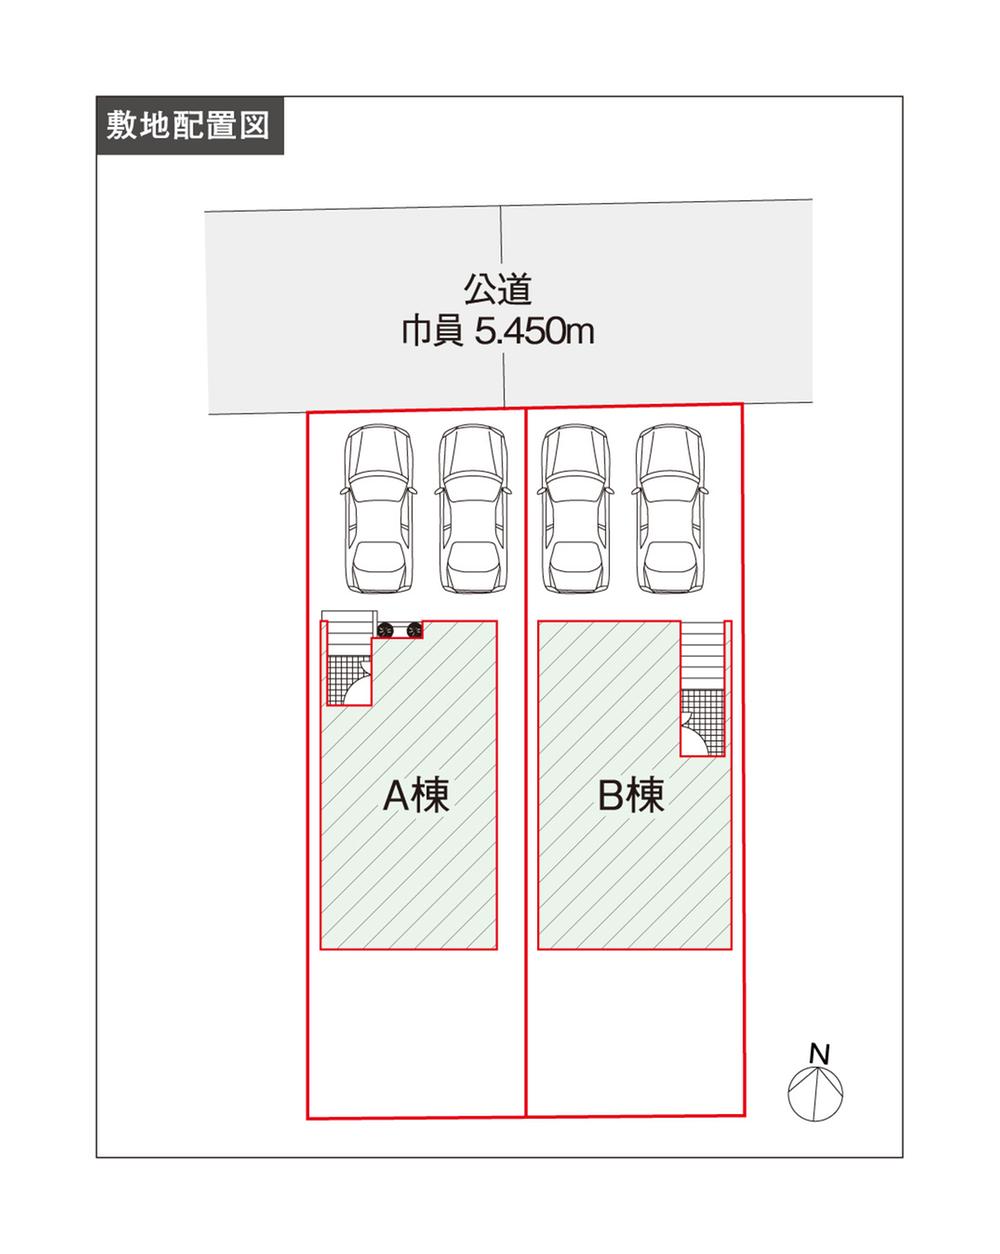 The entire compartment Figure. Site layout